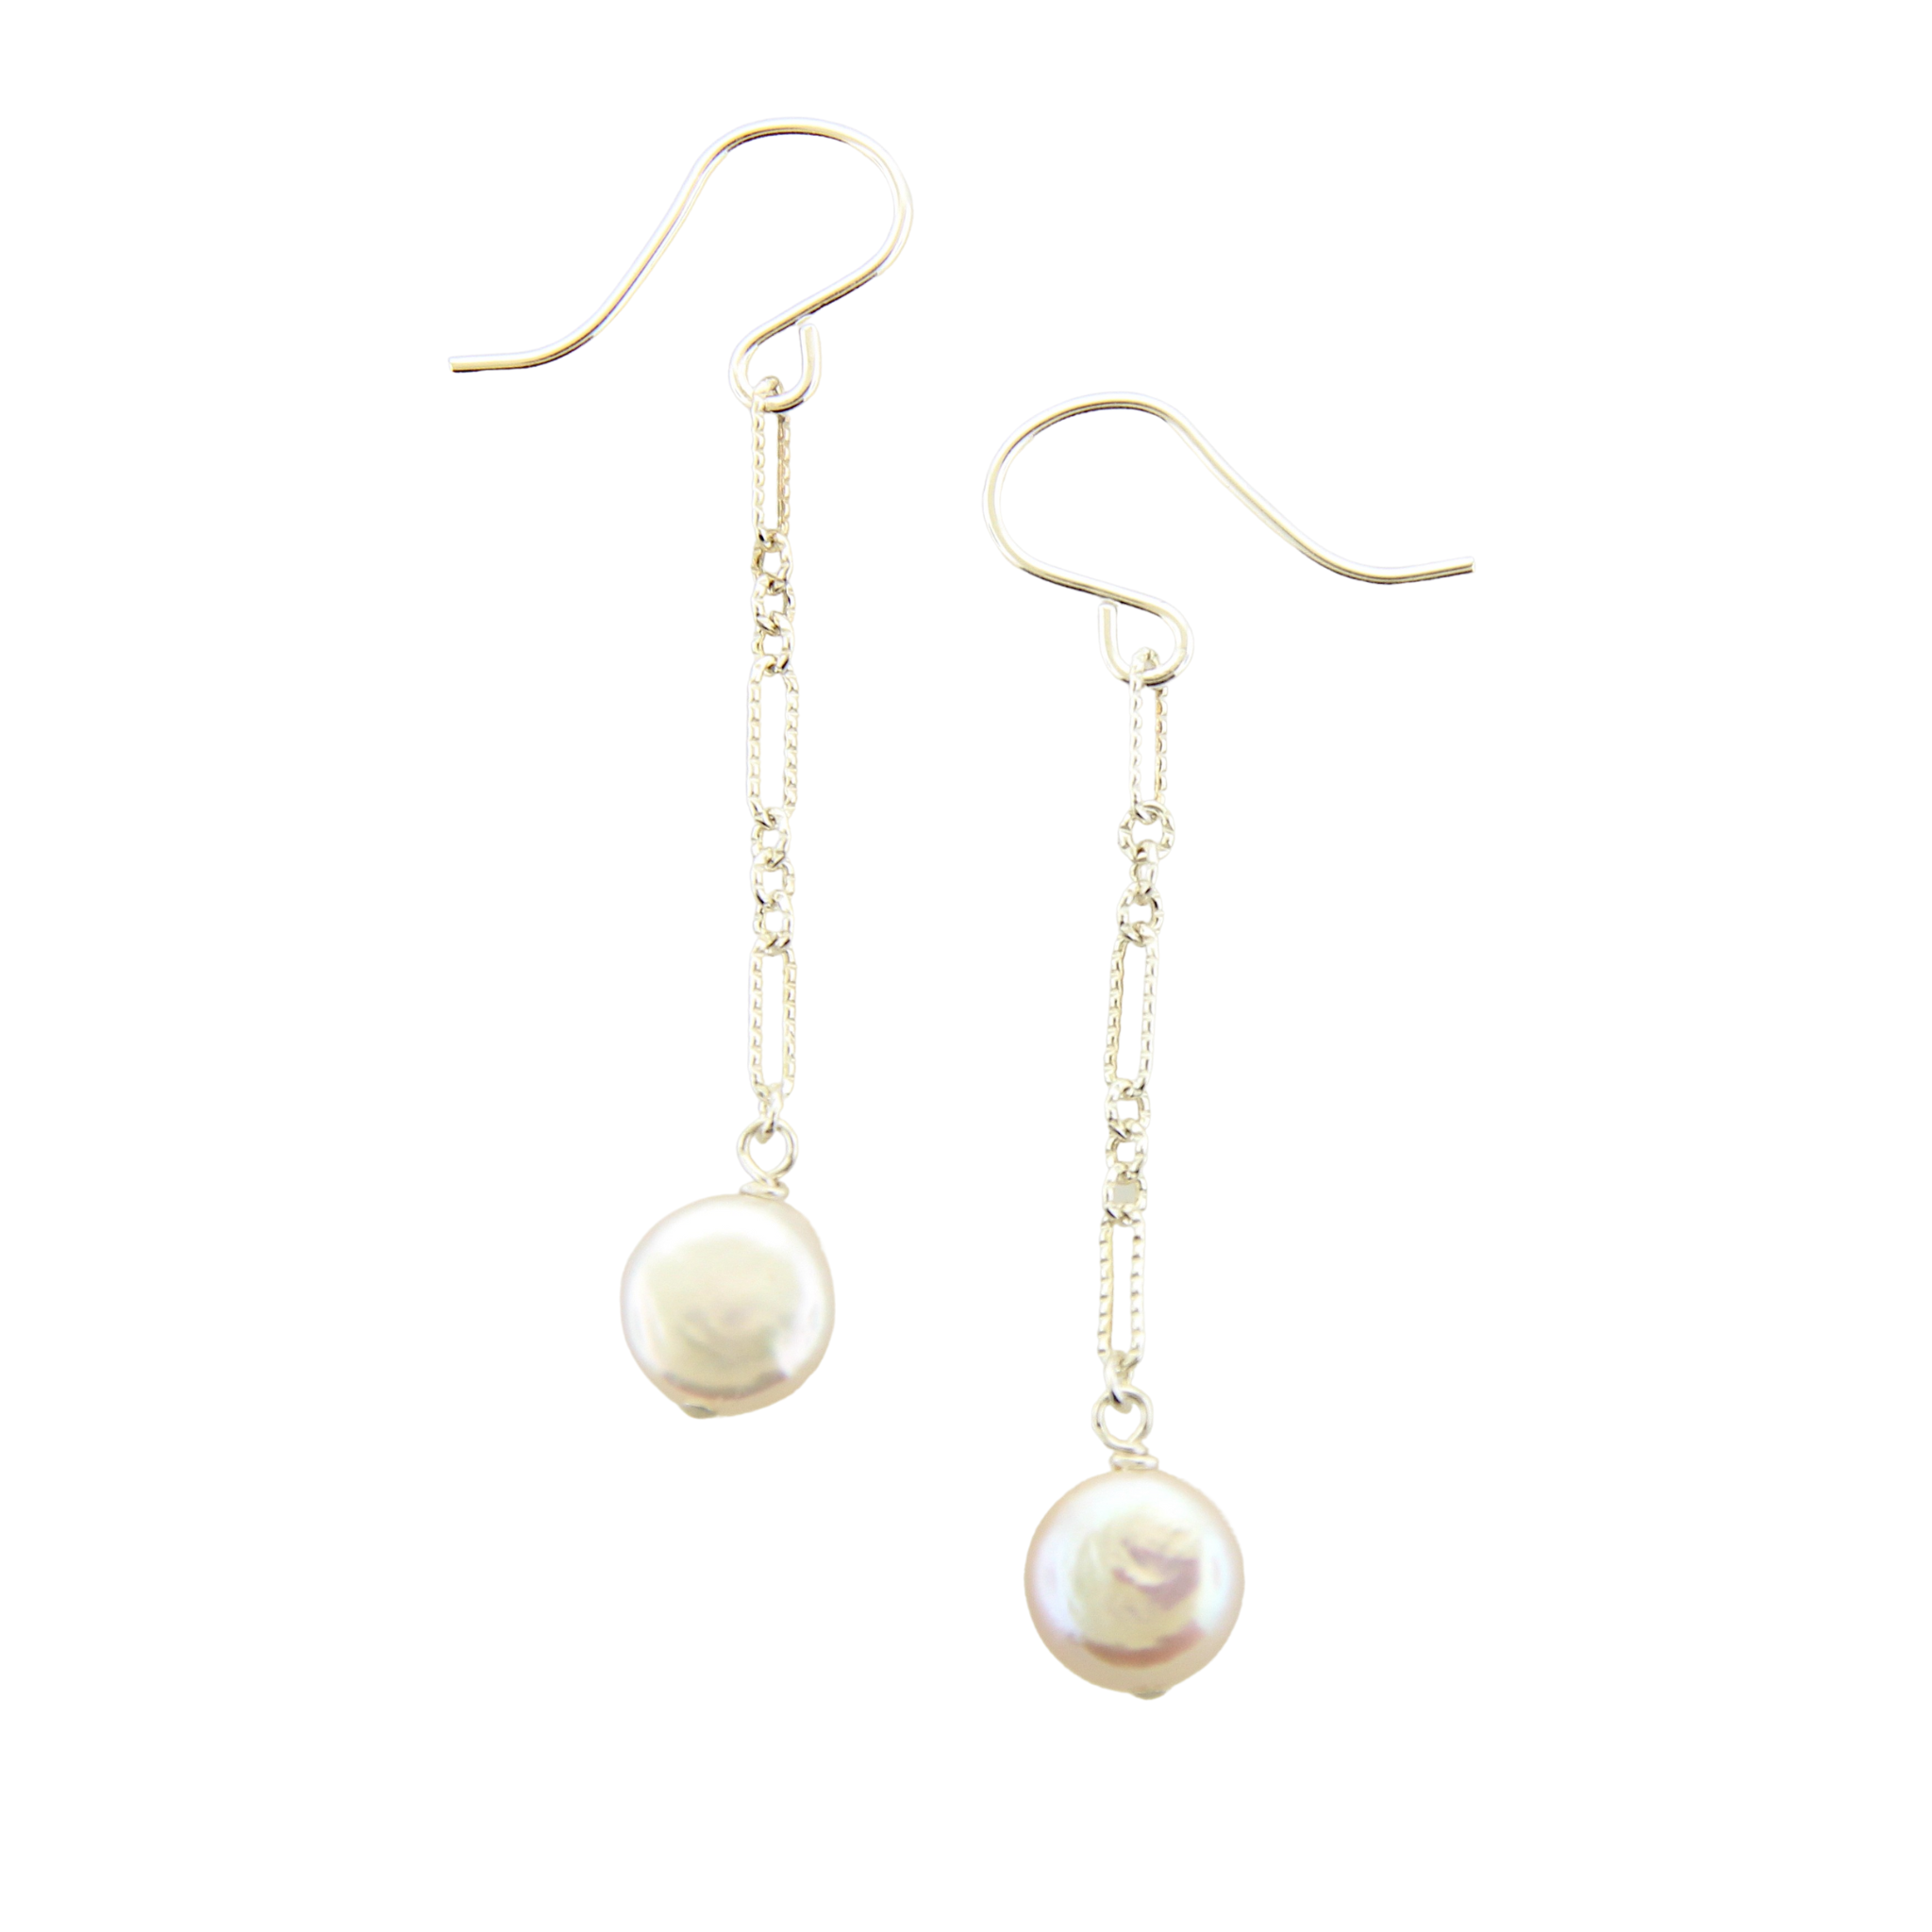 Starlight Silver Earrings - Coin Pearl